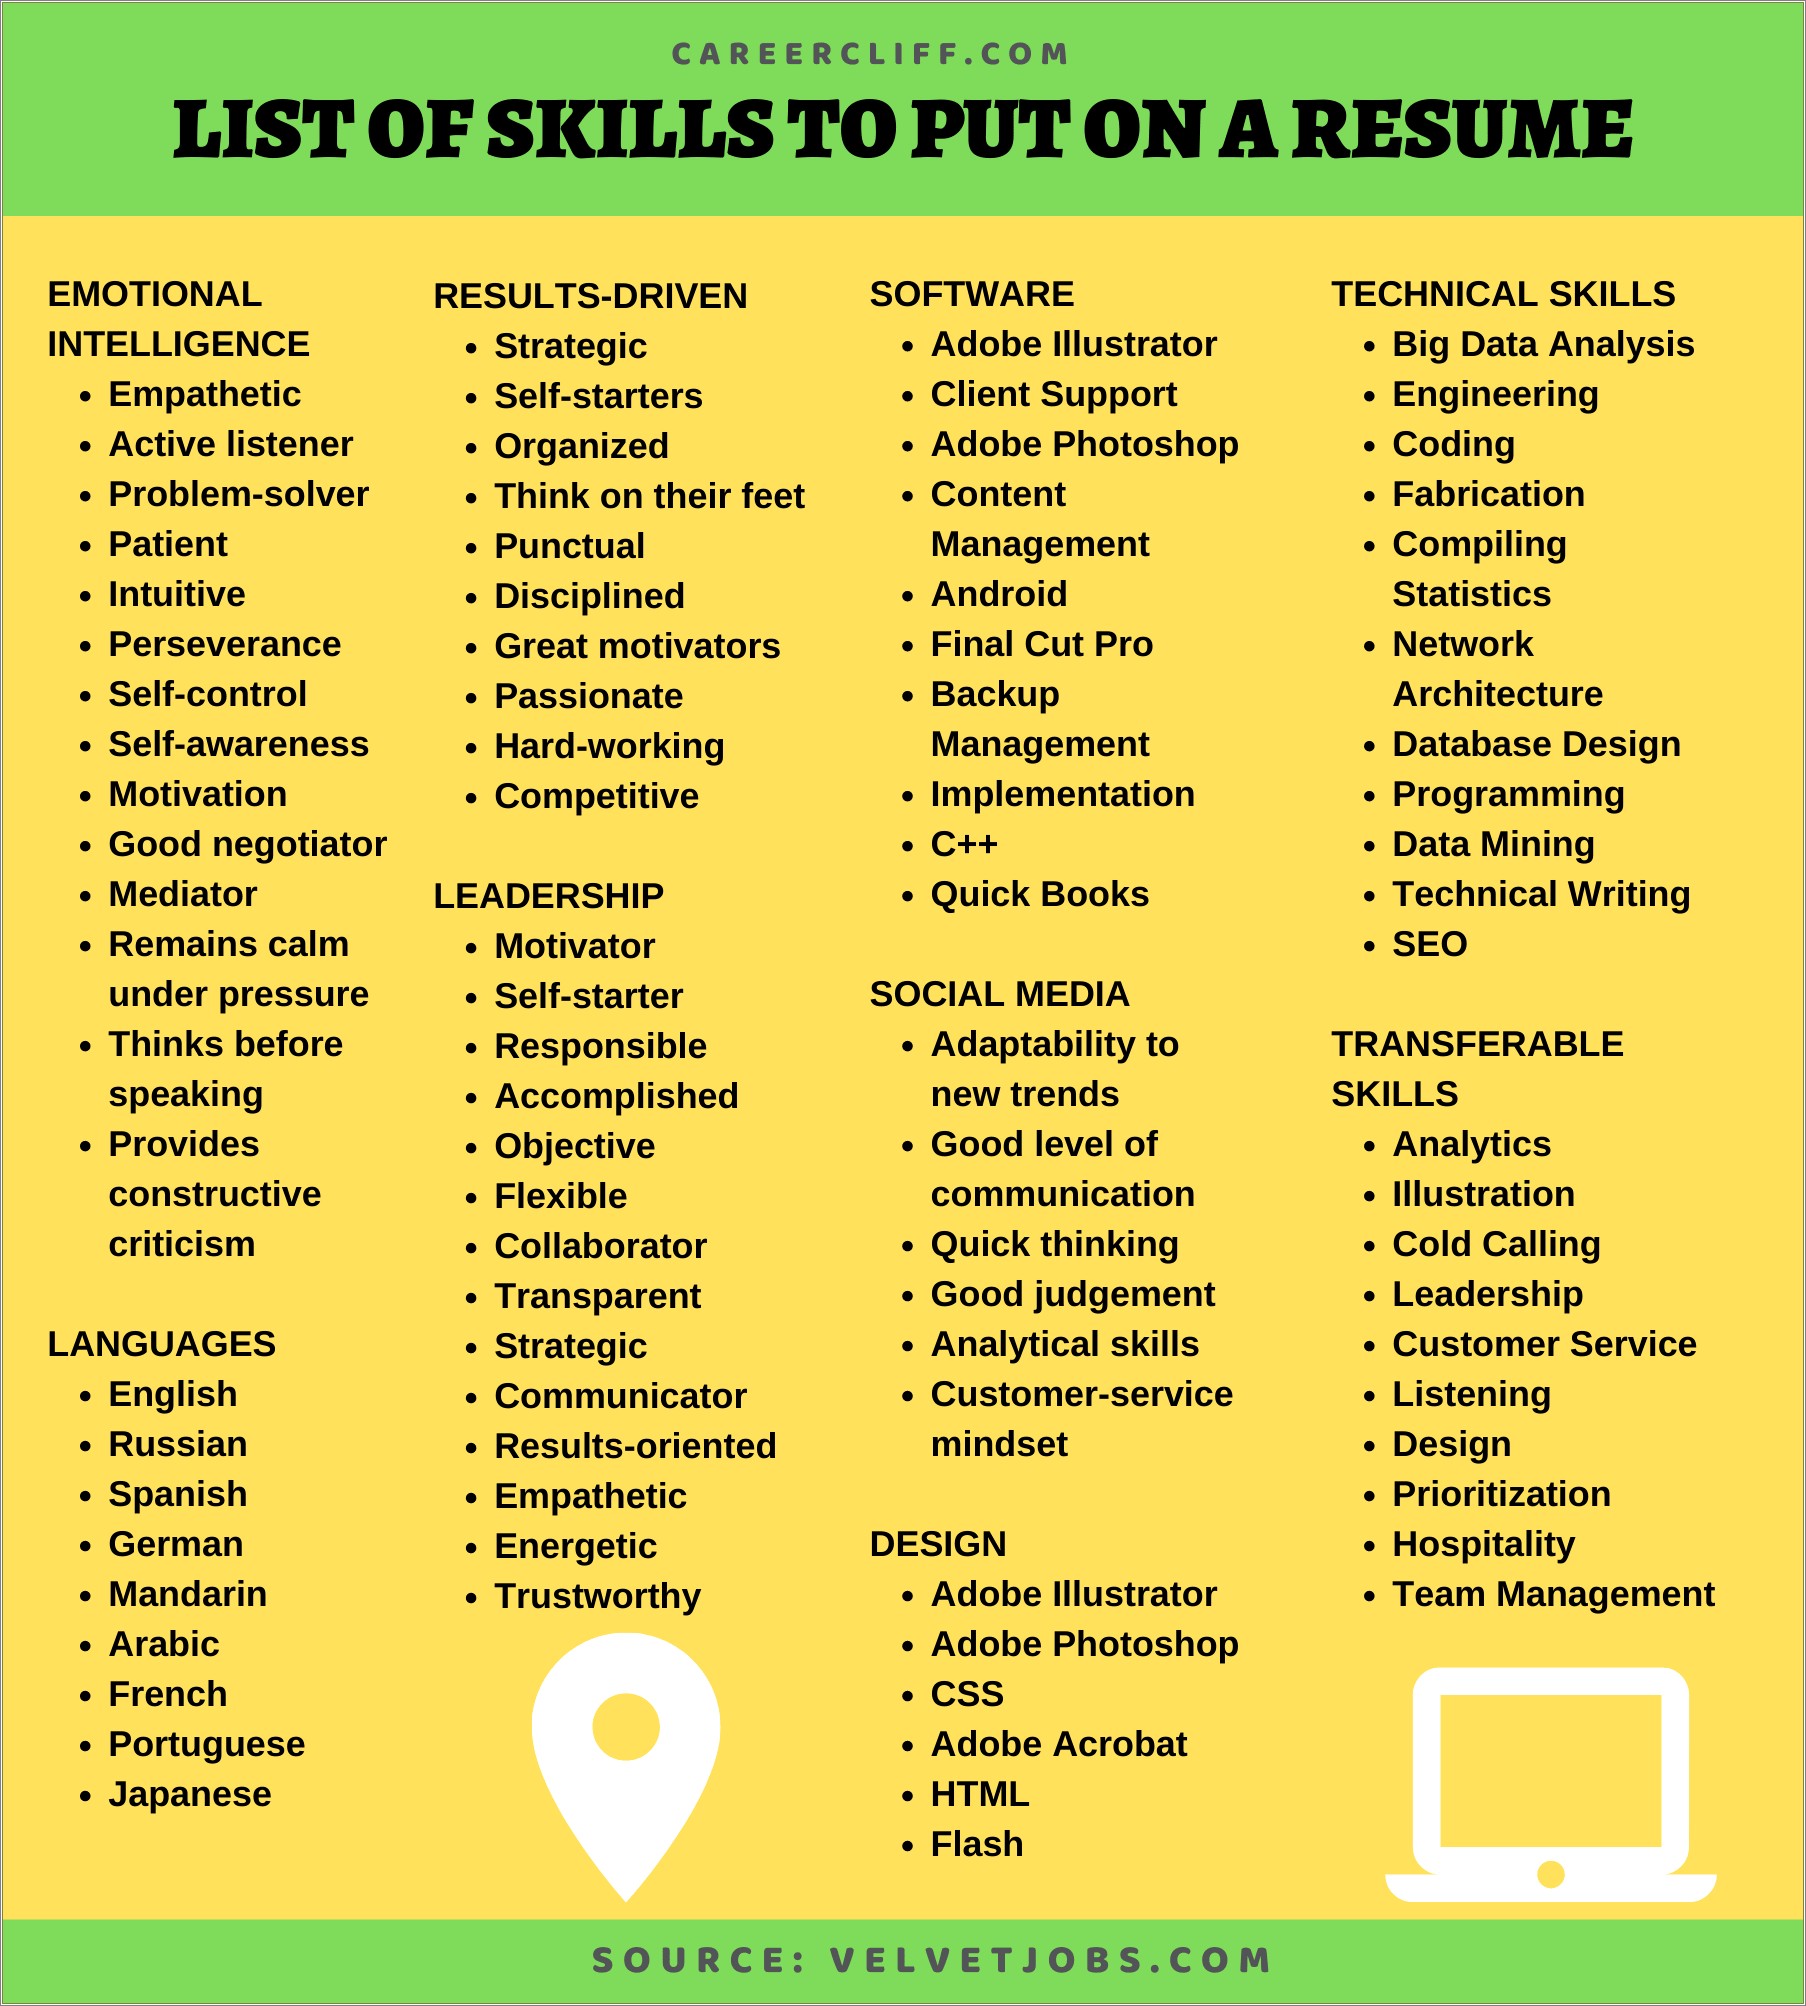 Is Responsible A Good Resume Skill